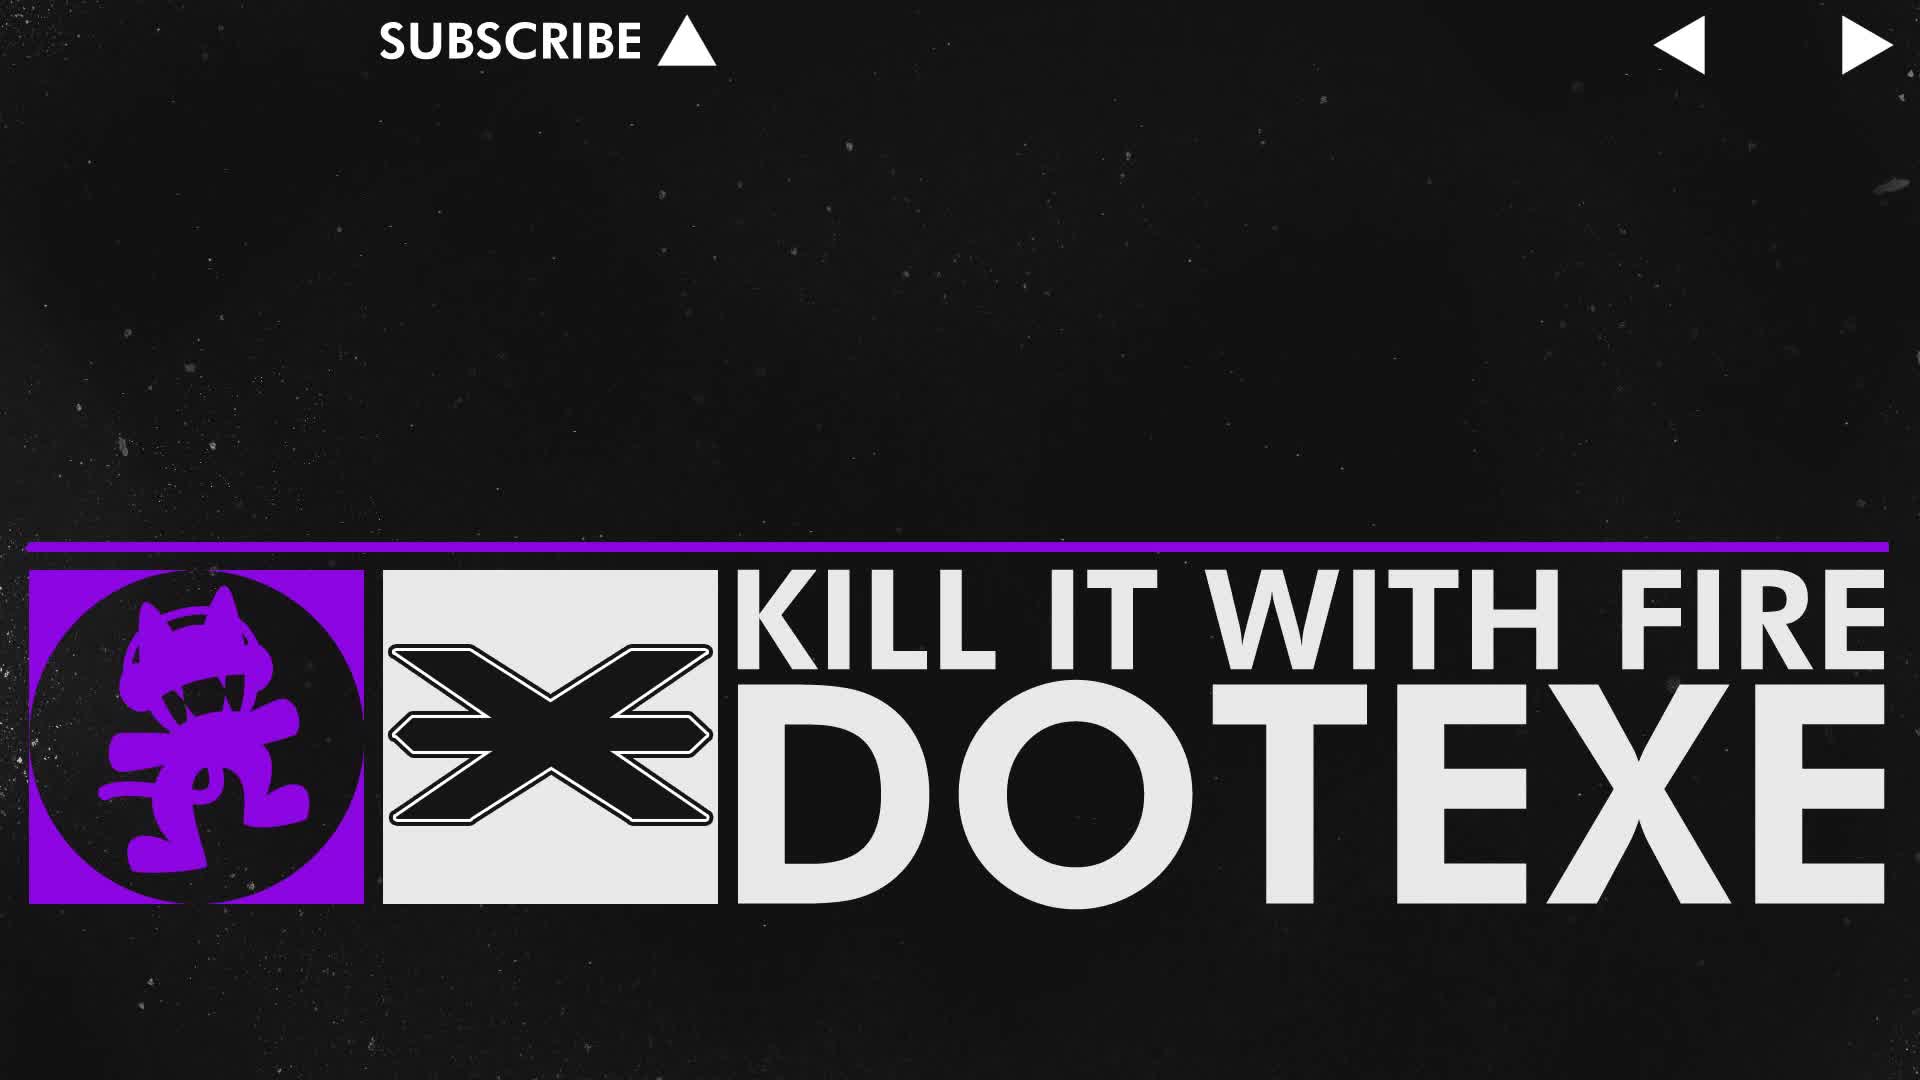 [Dubstep] - Kill it with Fire - DotEXE [Monstercat Release]